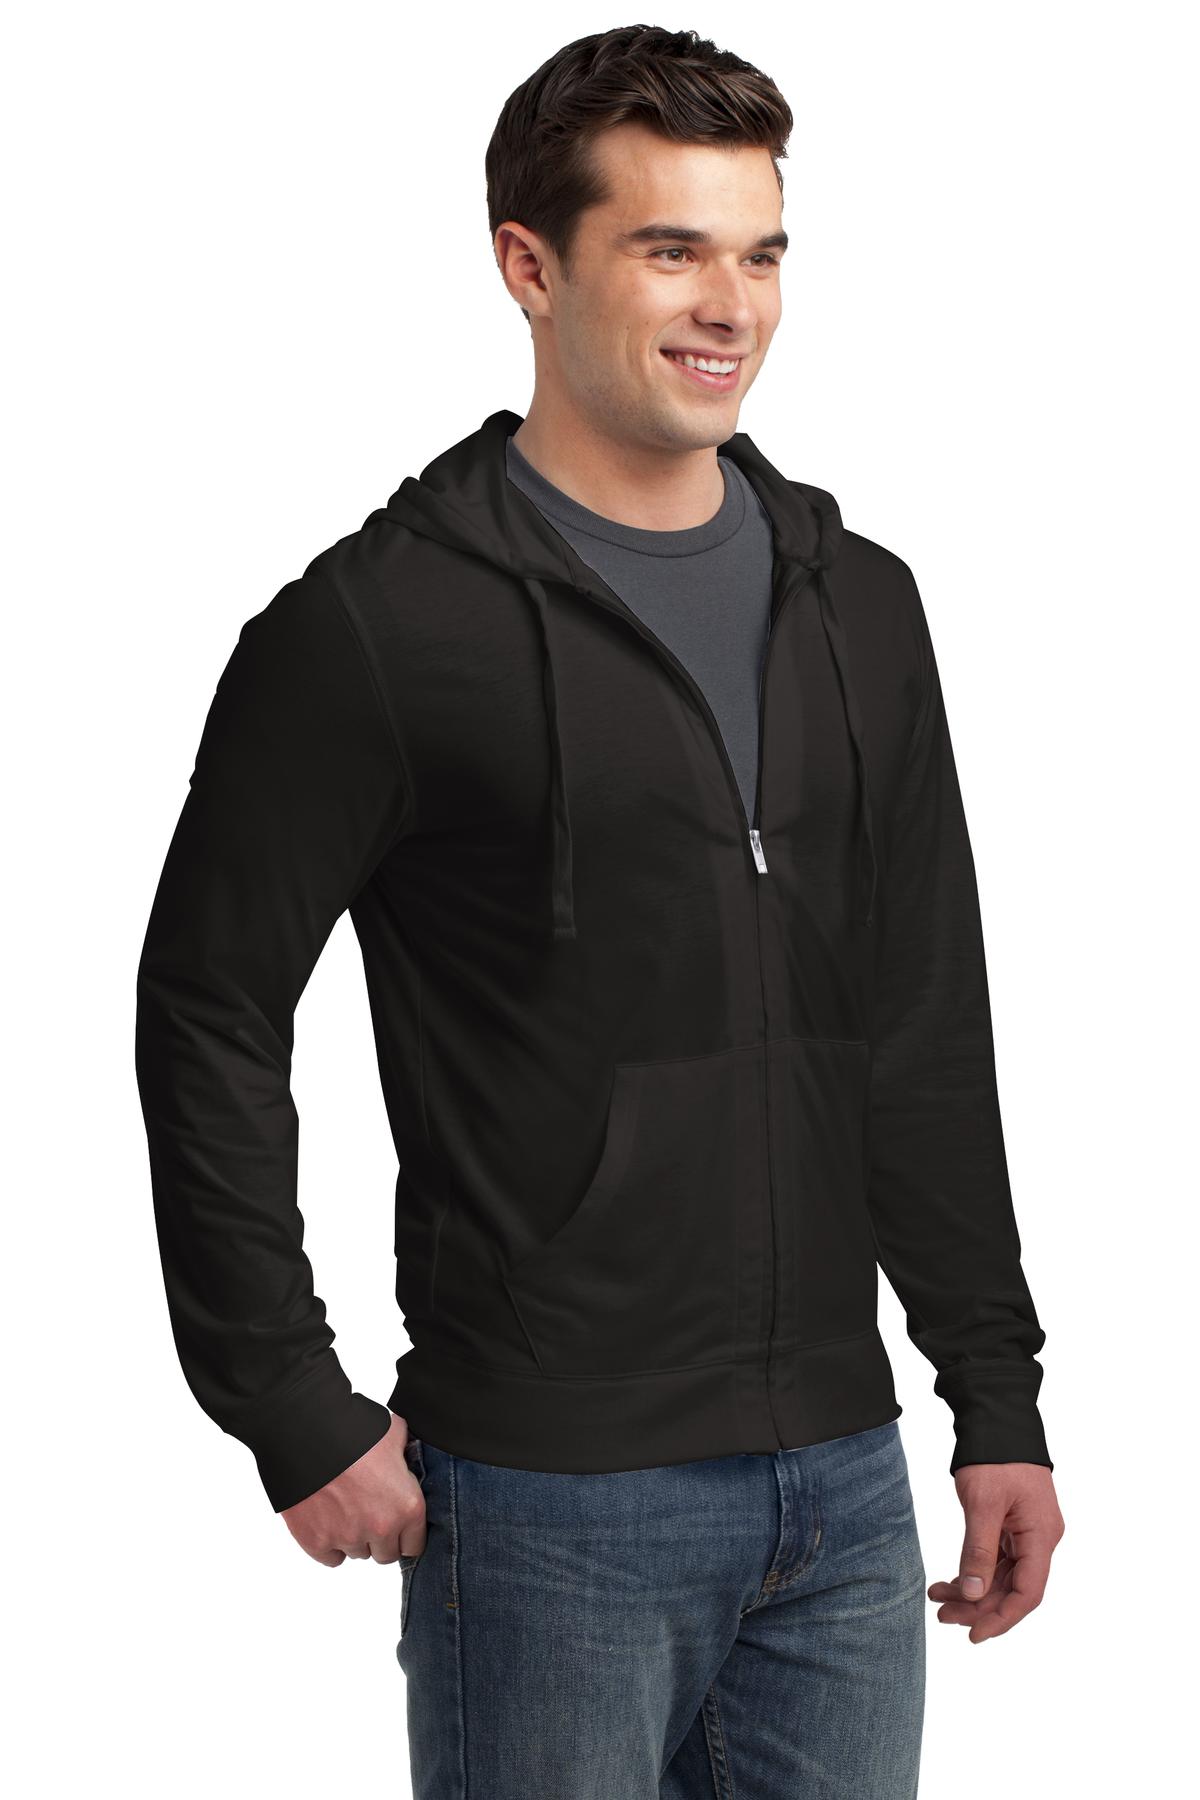 District Young Mens Jersey Full Zip Hoodie-L (Black) - image 4 of 6